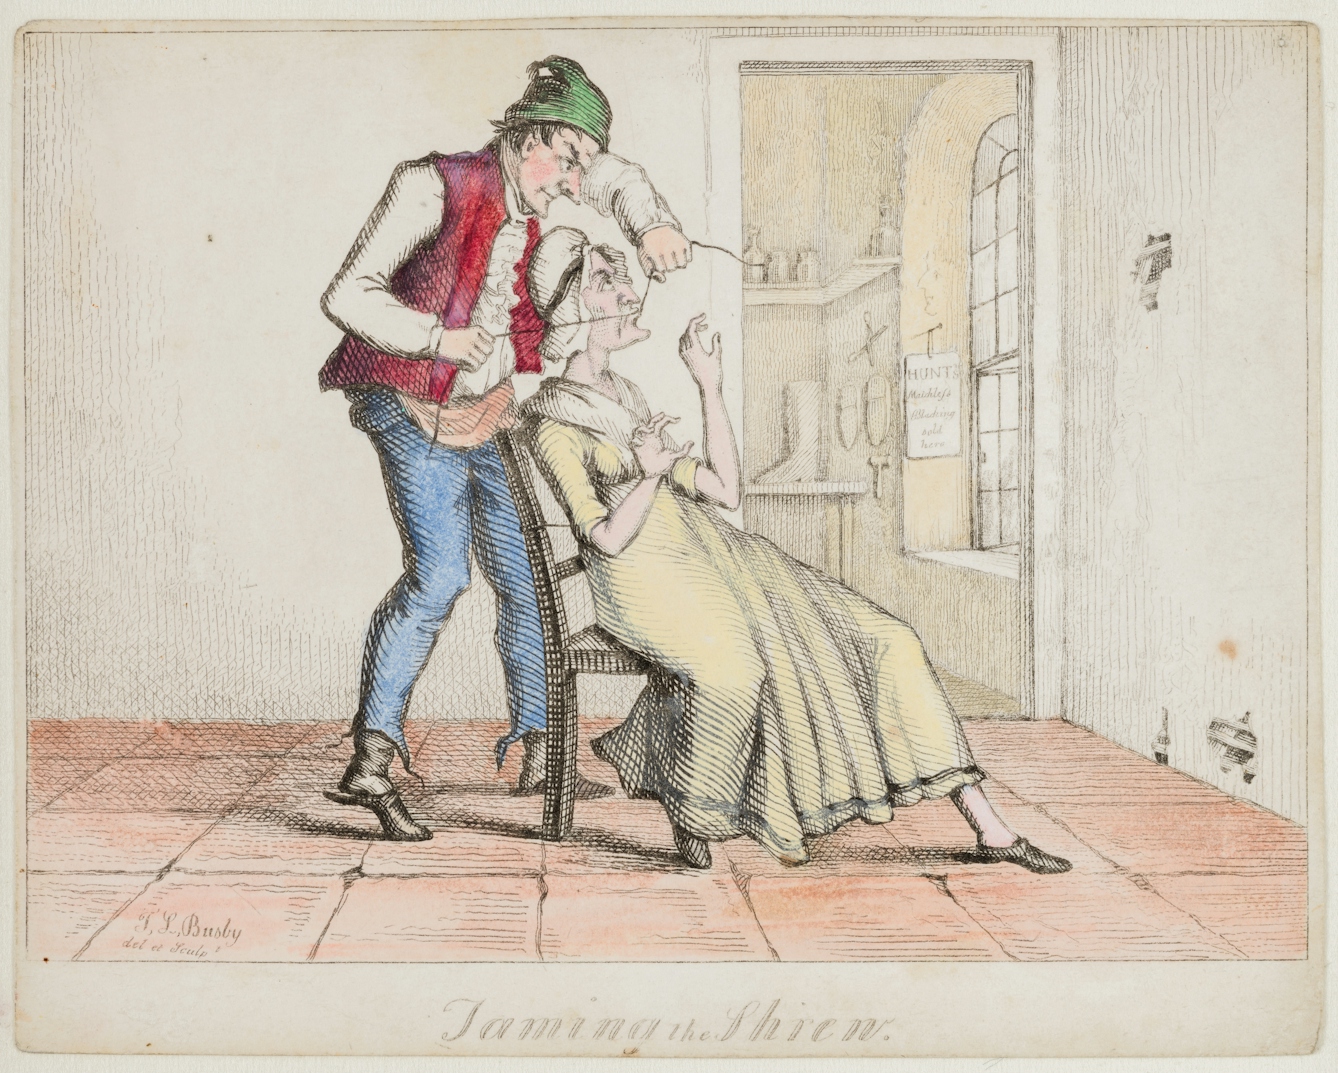 Colour illustration showing a man standing over a seated woman, sewing up her mouth